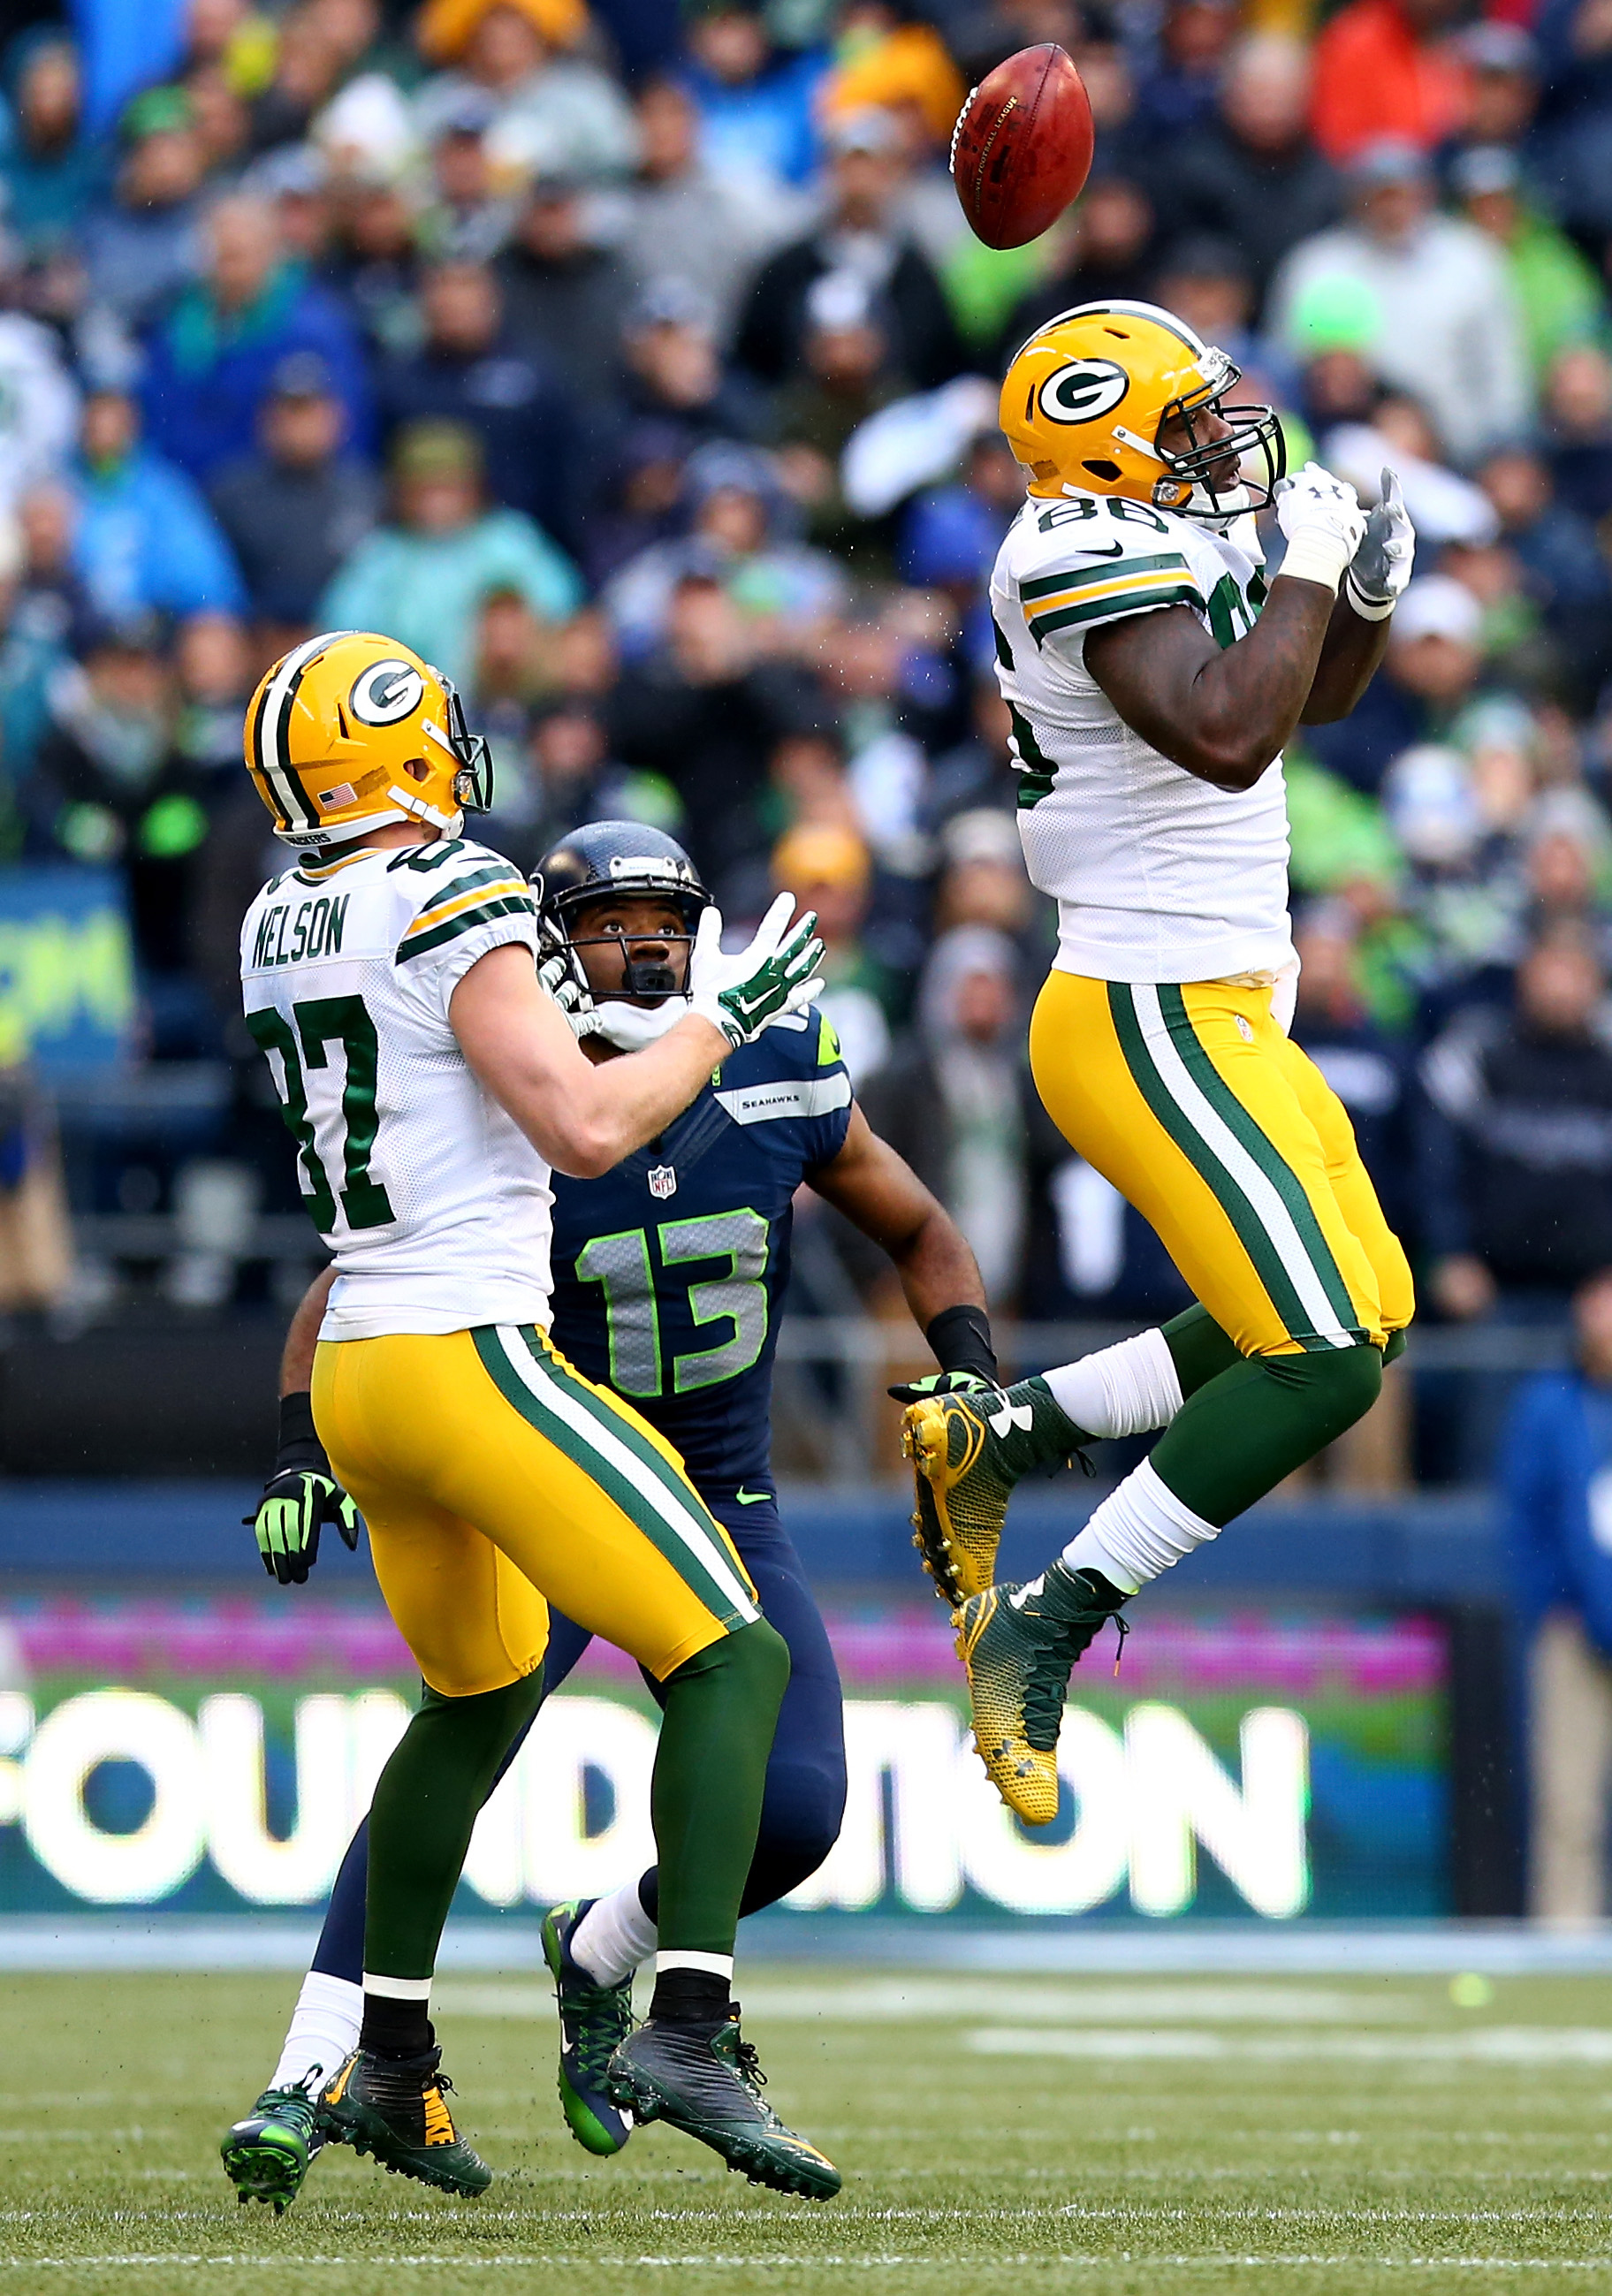 Brandon Bostick of the Green Bay Packers (right) bobbles an onsides kick as during the fourth quarter of the 2015 NFC Championship game at CenturyLink Field on January 18, 2015 in Seattle, Washington. (Ronald Martinez&mdash;Getty Images)